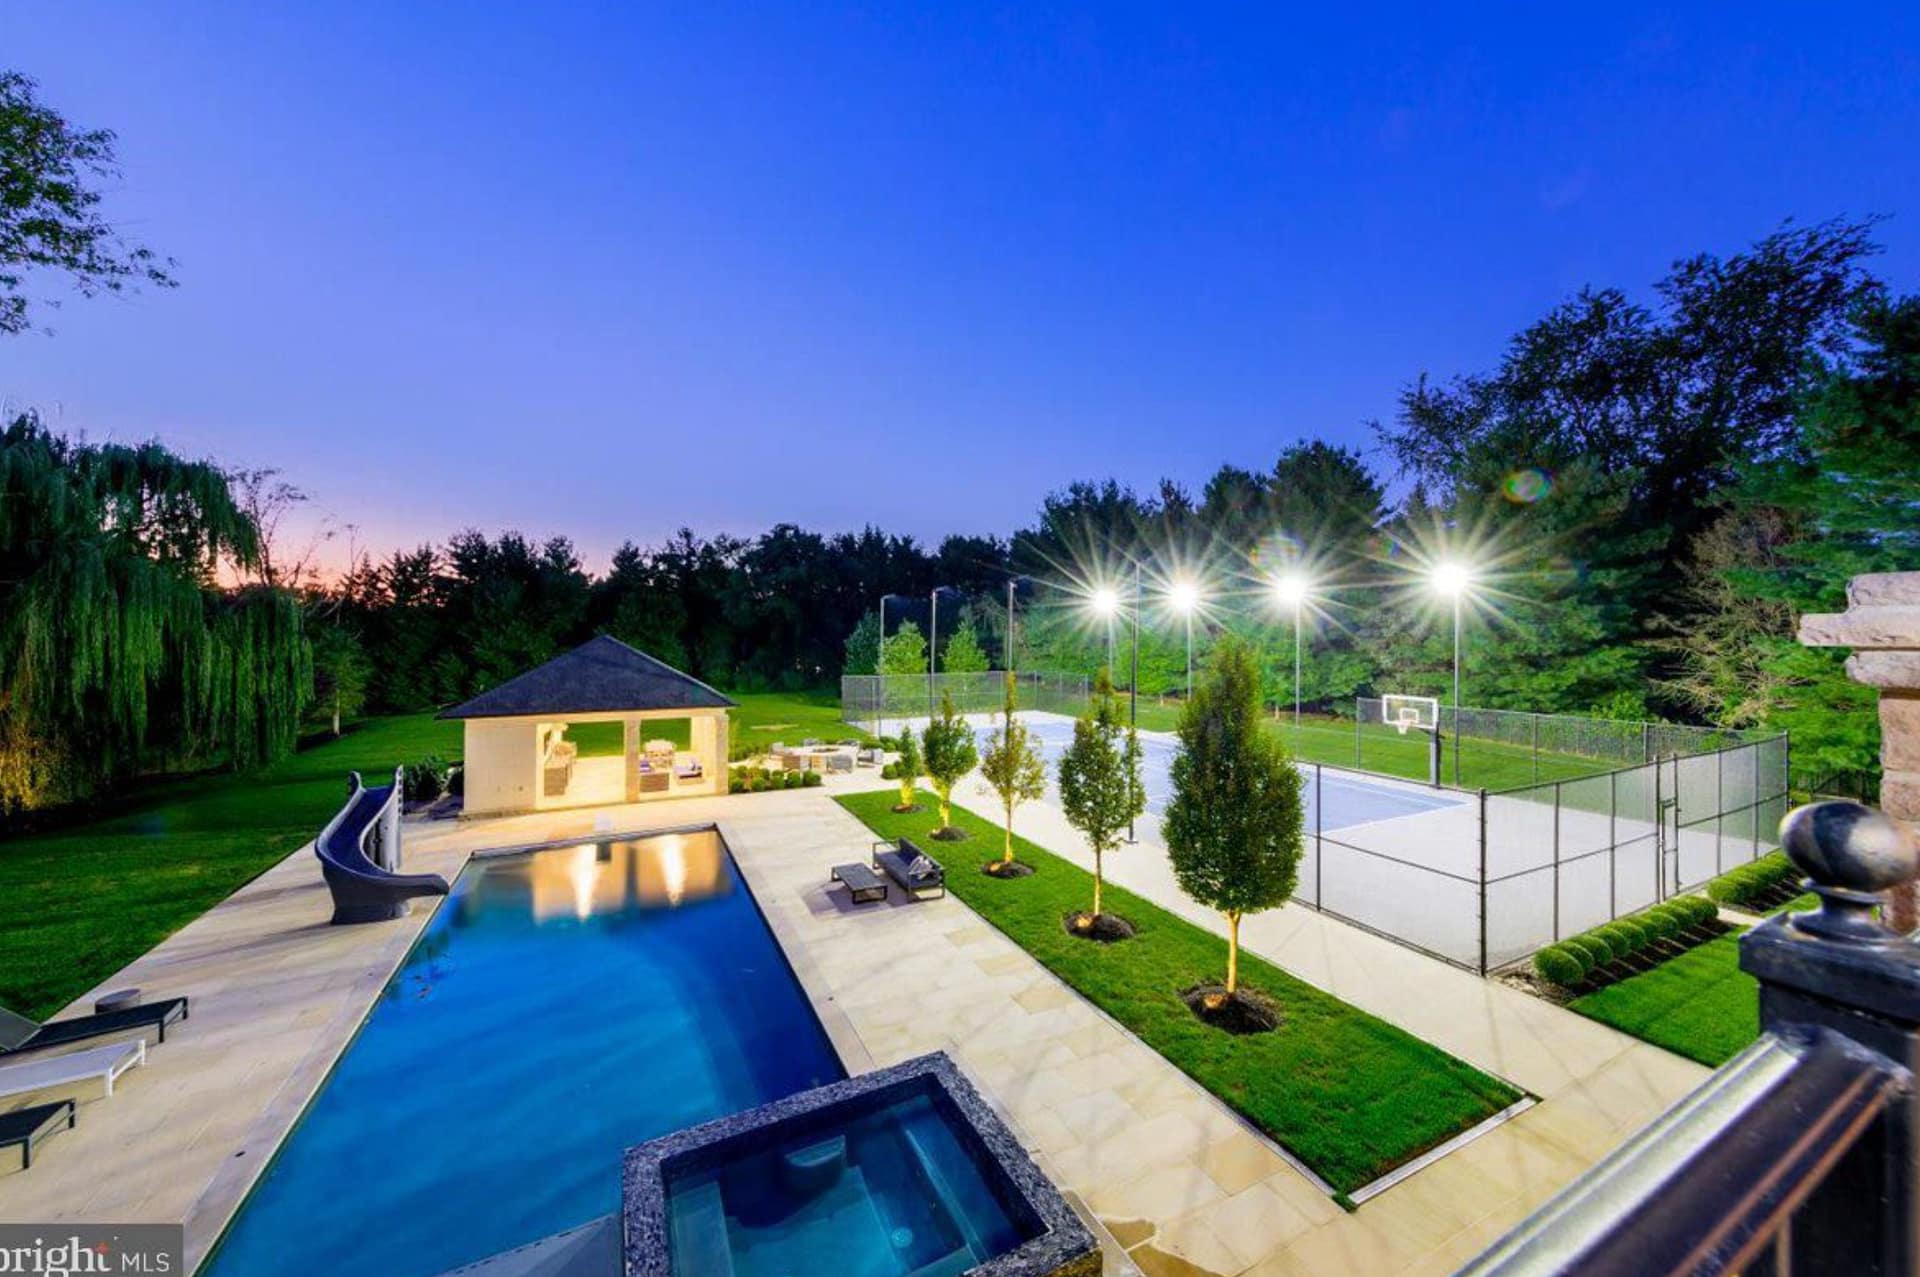 Maryland Home With Indoor Basketball Court (PHOTOS)